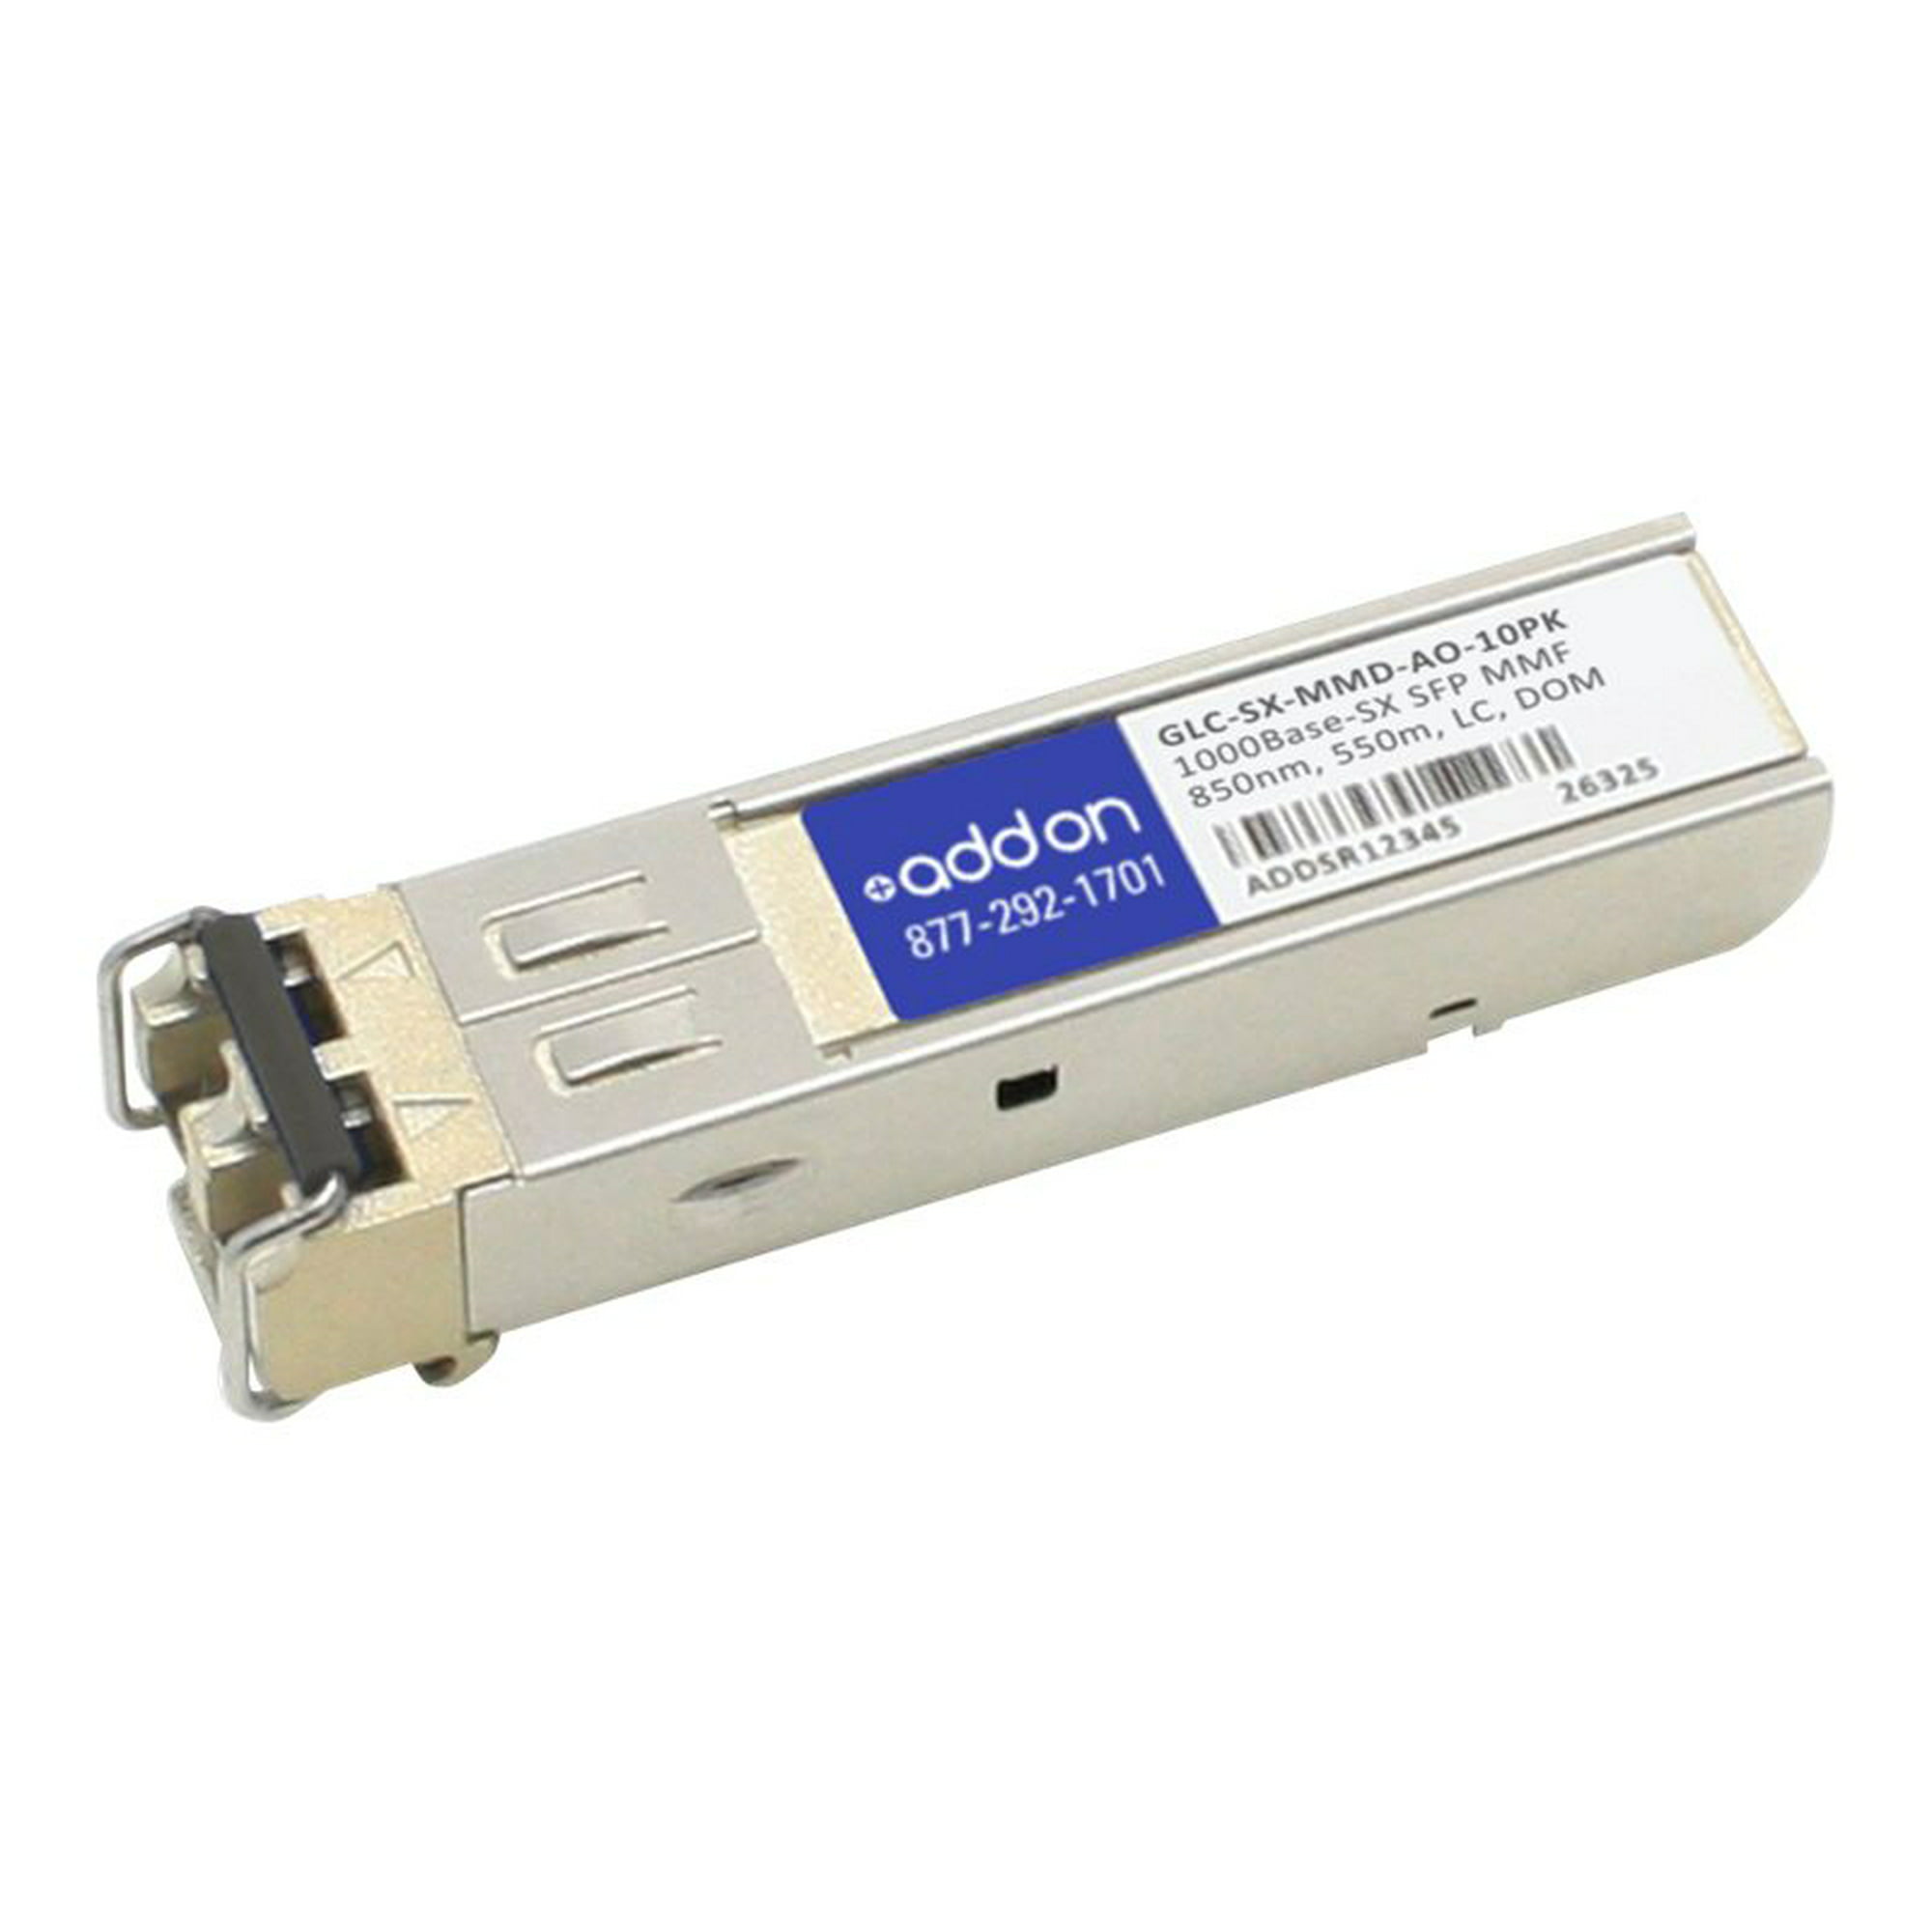 AddOn - SFP (mini-GBIC) transceiver module (equivalent to: Cisco  GLC-SX-MMD) - GigE - 1000Base-SX - LC multi-mode - up to 1800 ft - 850 nm -  TAA 